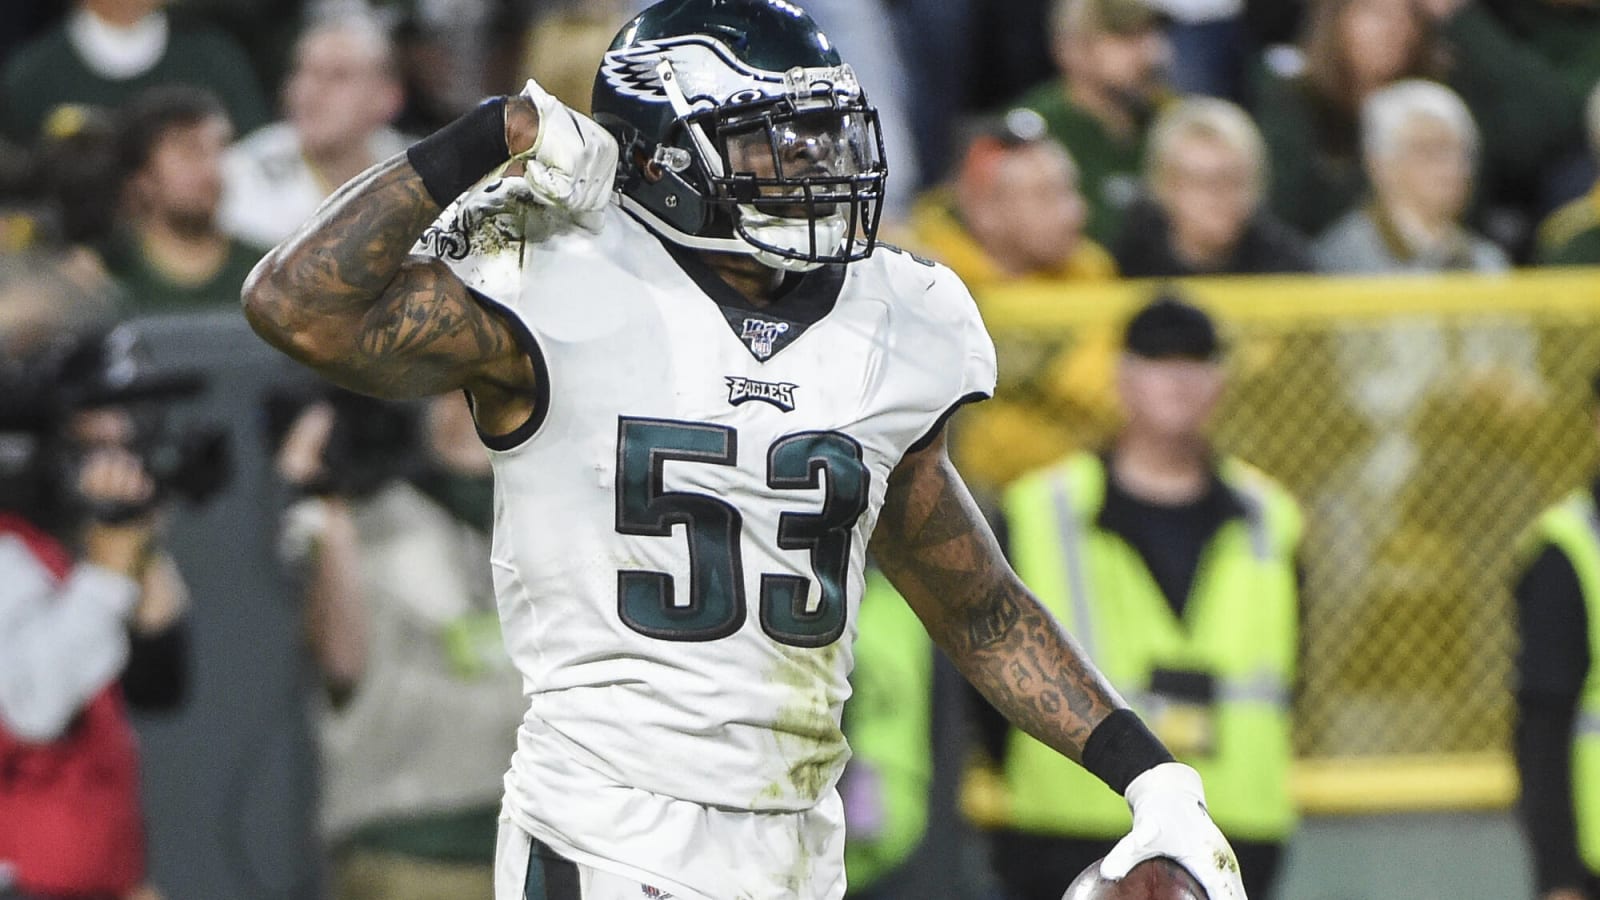 Find out what Nigel Bradham’s Super Bowl ring  and Malcolm Jenkins’ Game-worn jersey sold for